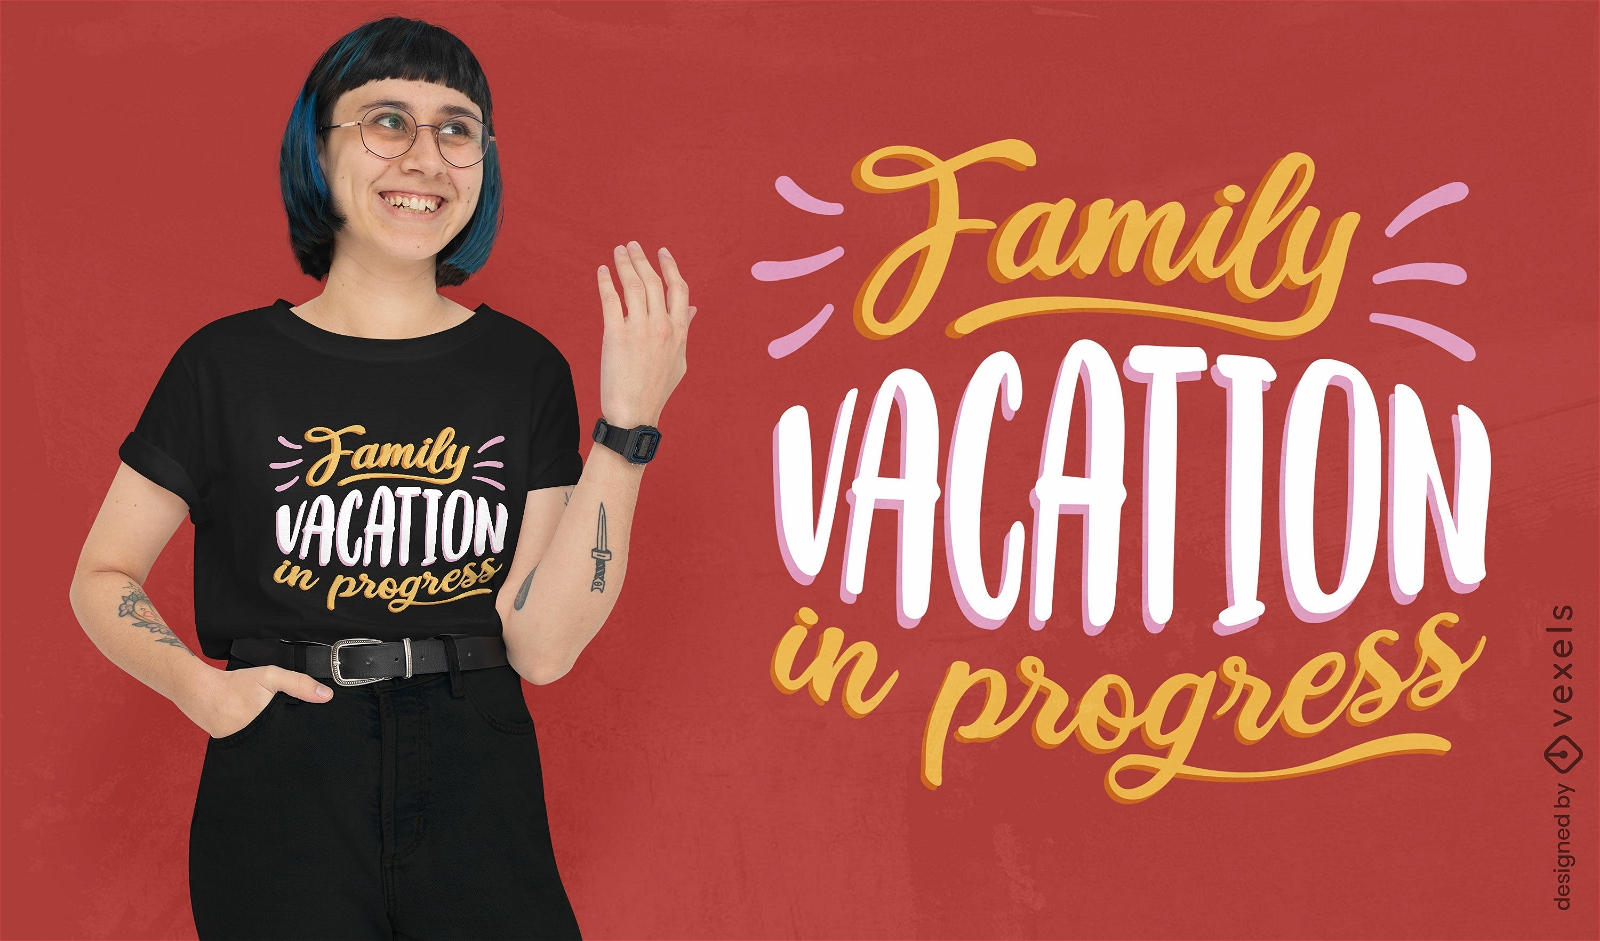 Family vacation lettering t-shirt design